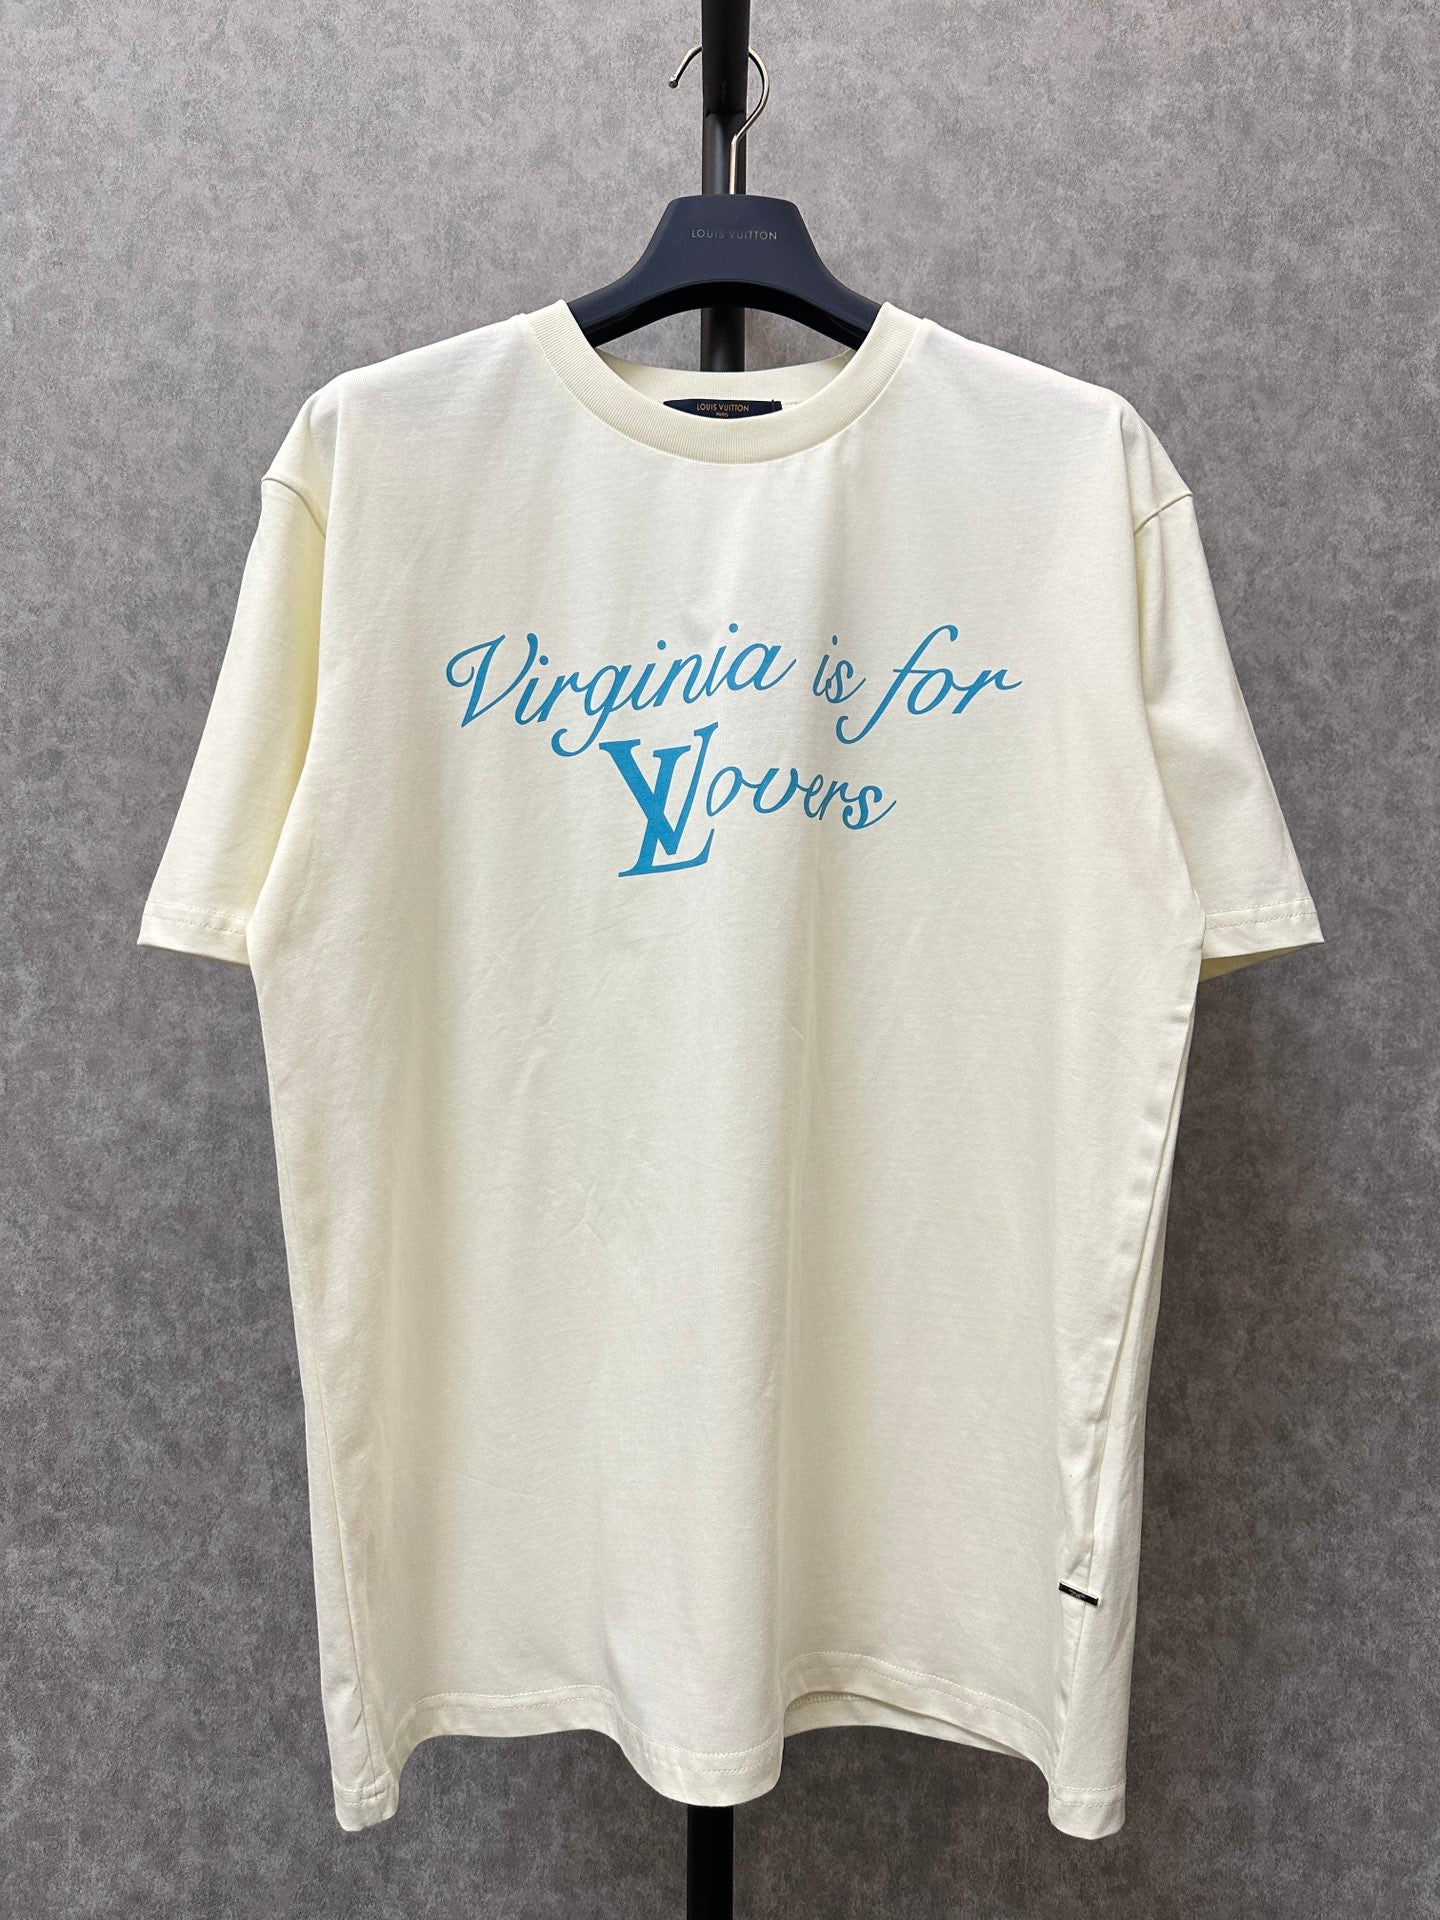 Louis Vuitton x Something in the Water VA Is For Lovers Printed T-shirt